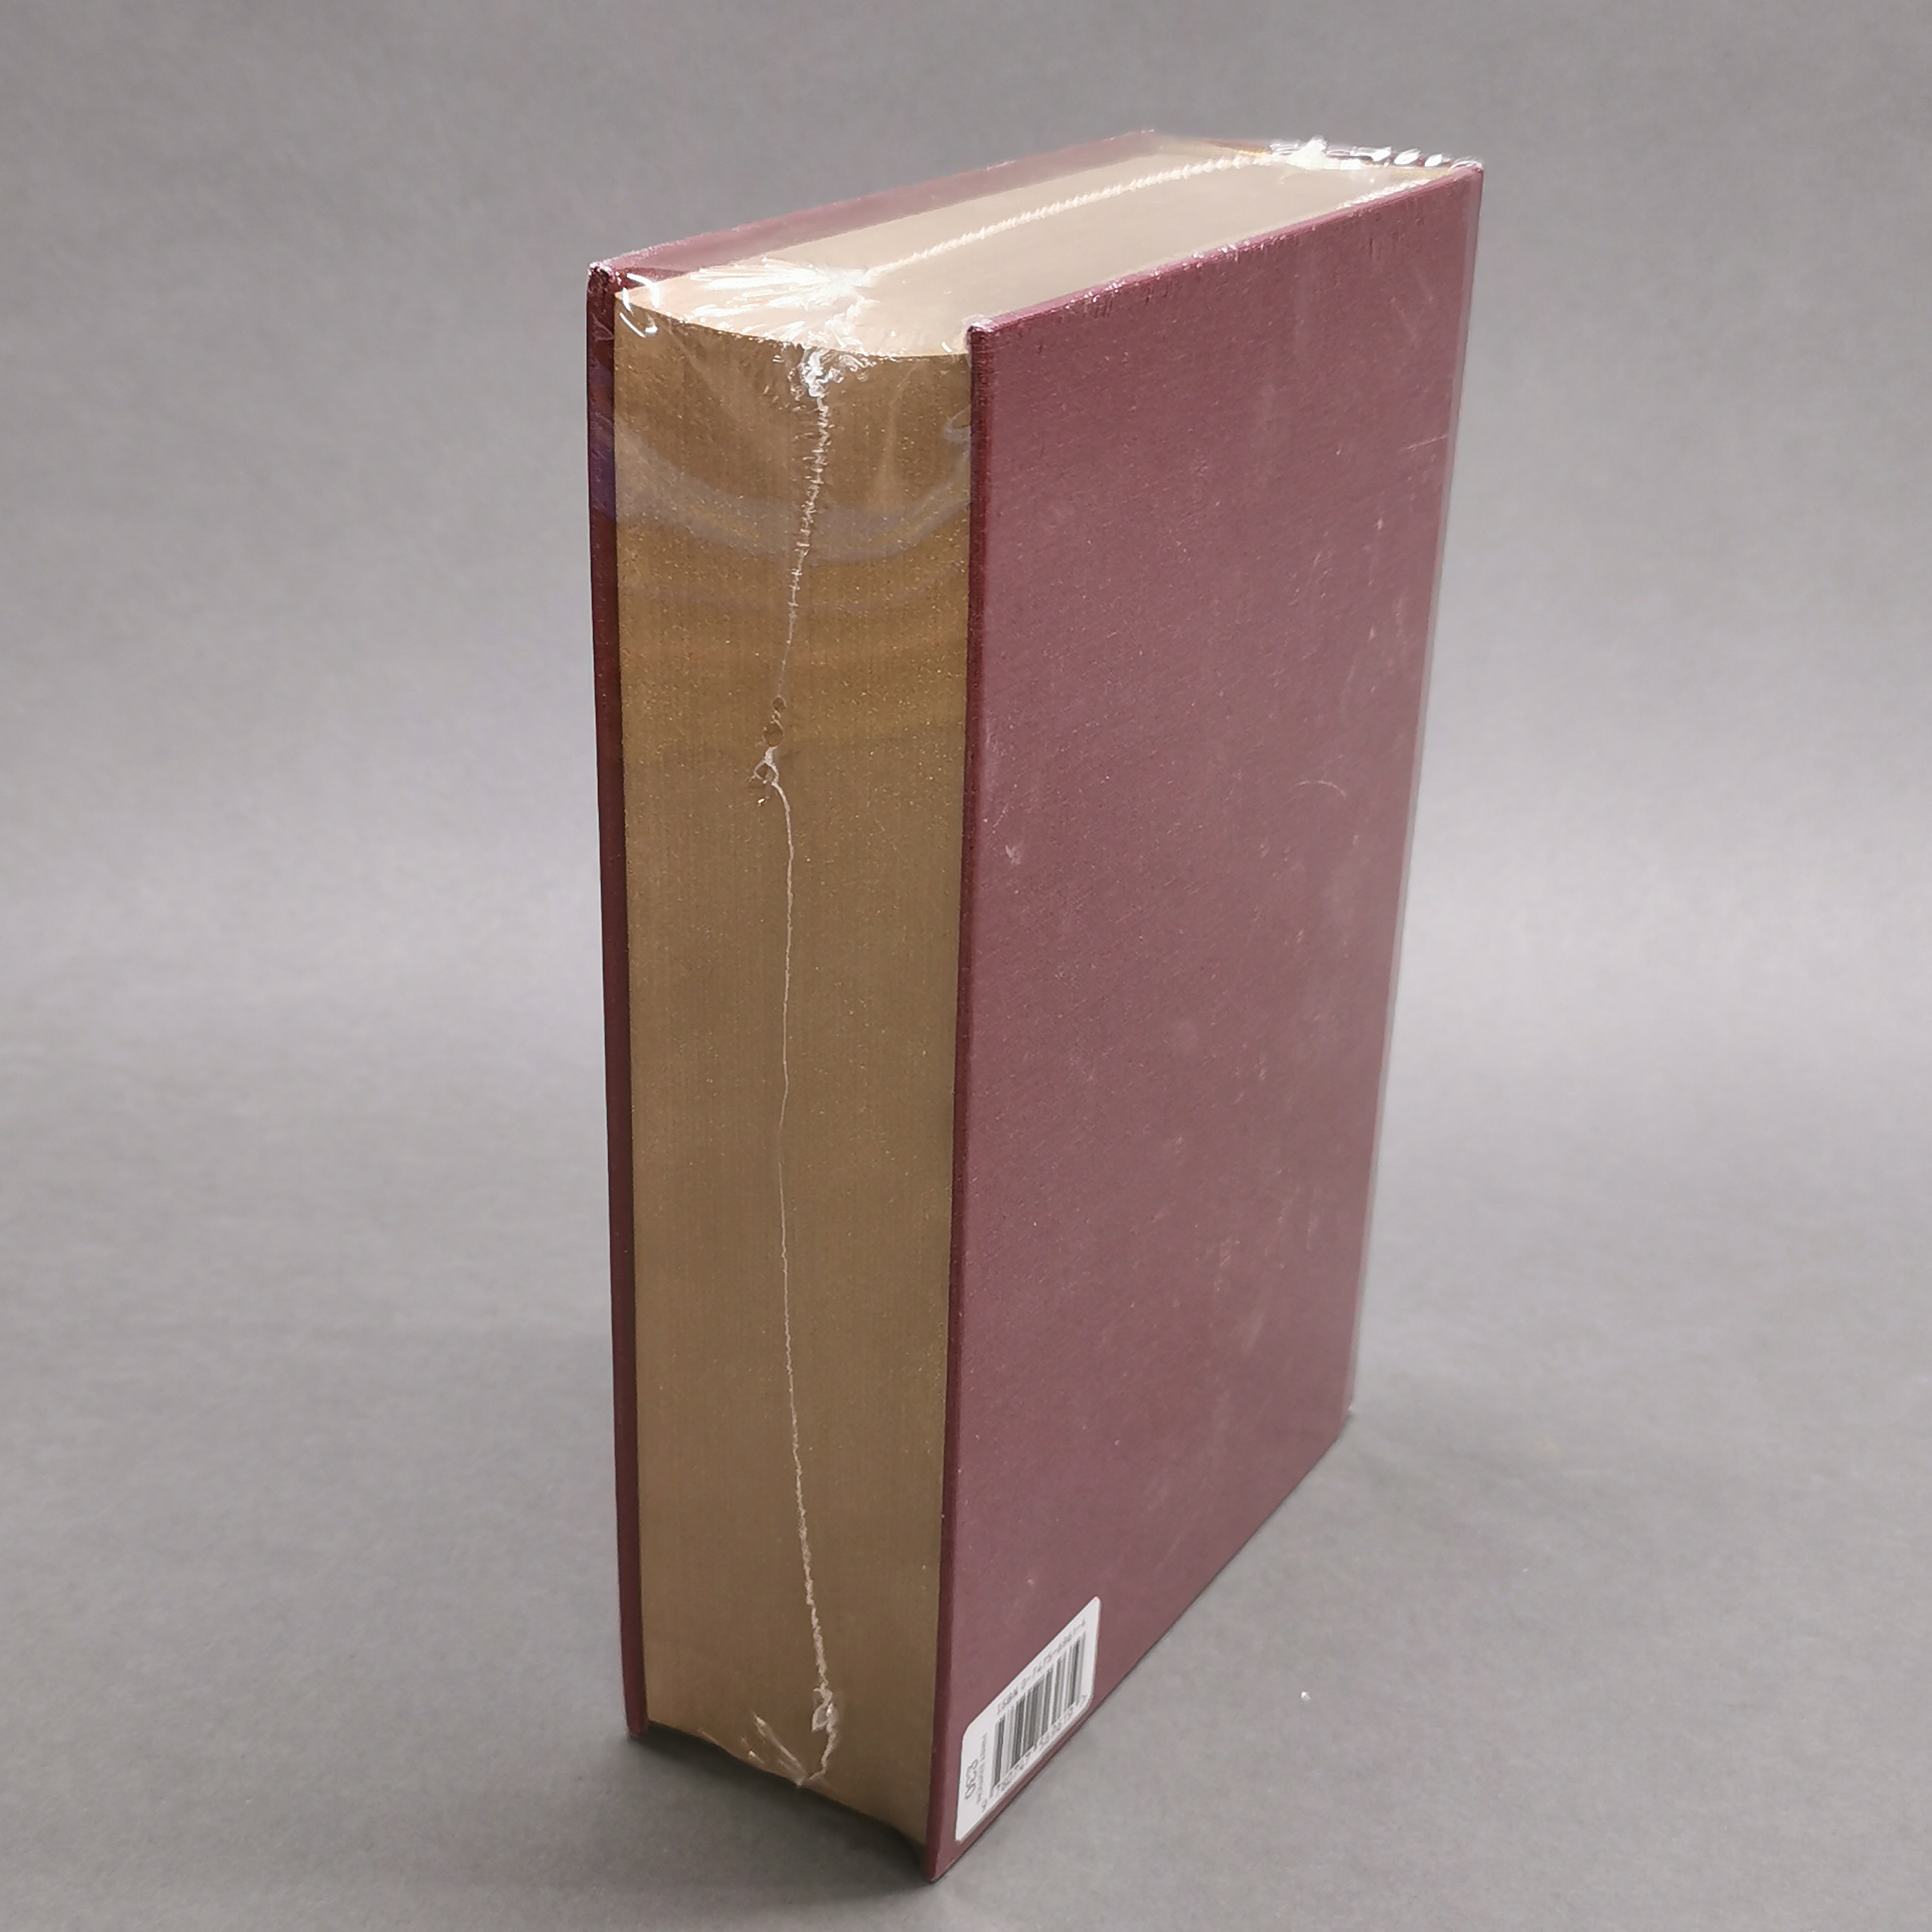 A first edition sealed hardback Harry Potter and the Order of the phoenix novel. - Image 2 of 3